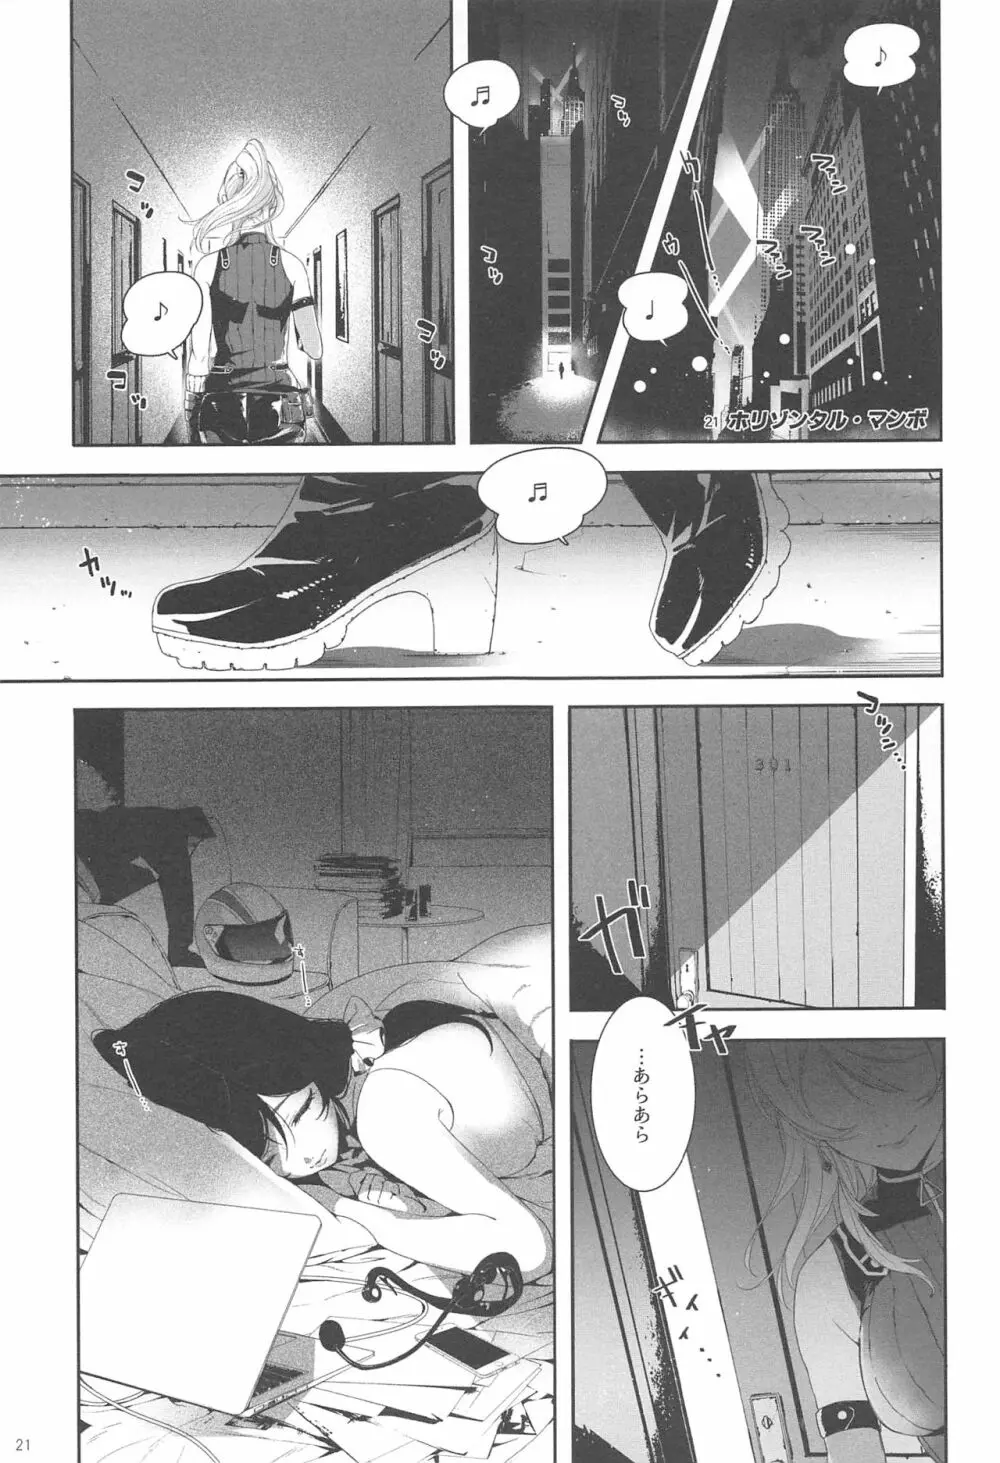 Re:デーデッデー!!!!!!!! - page22